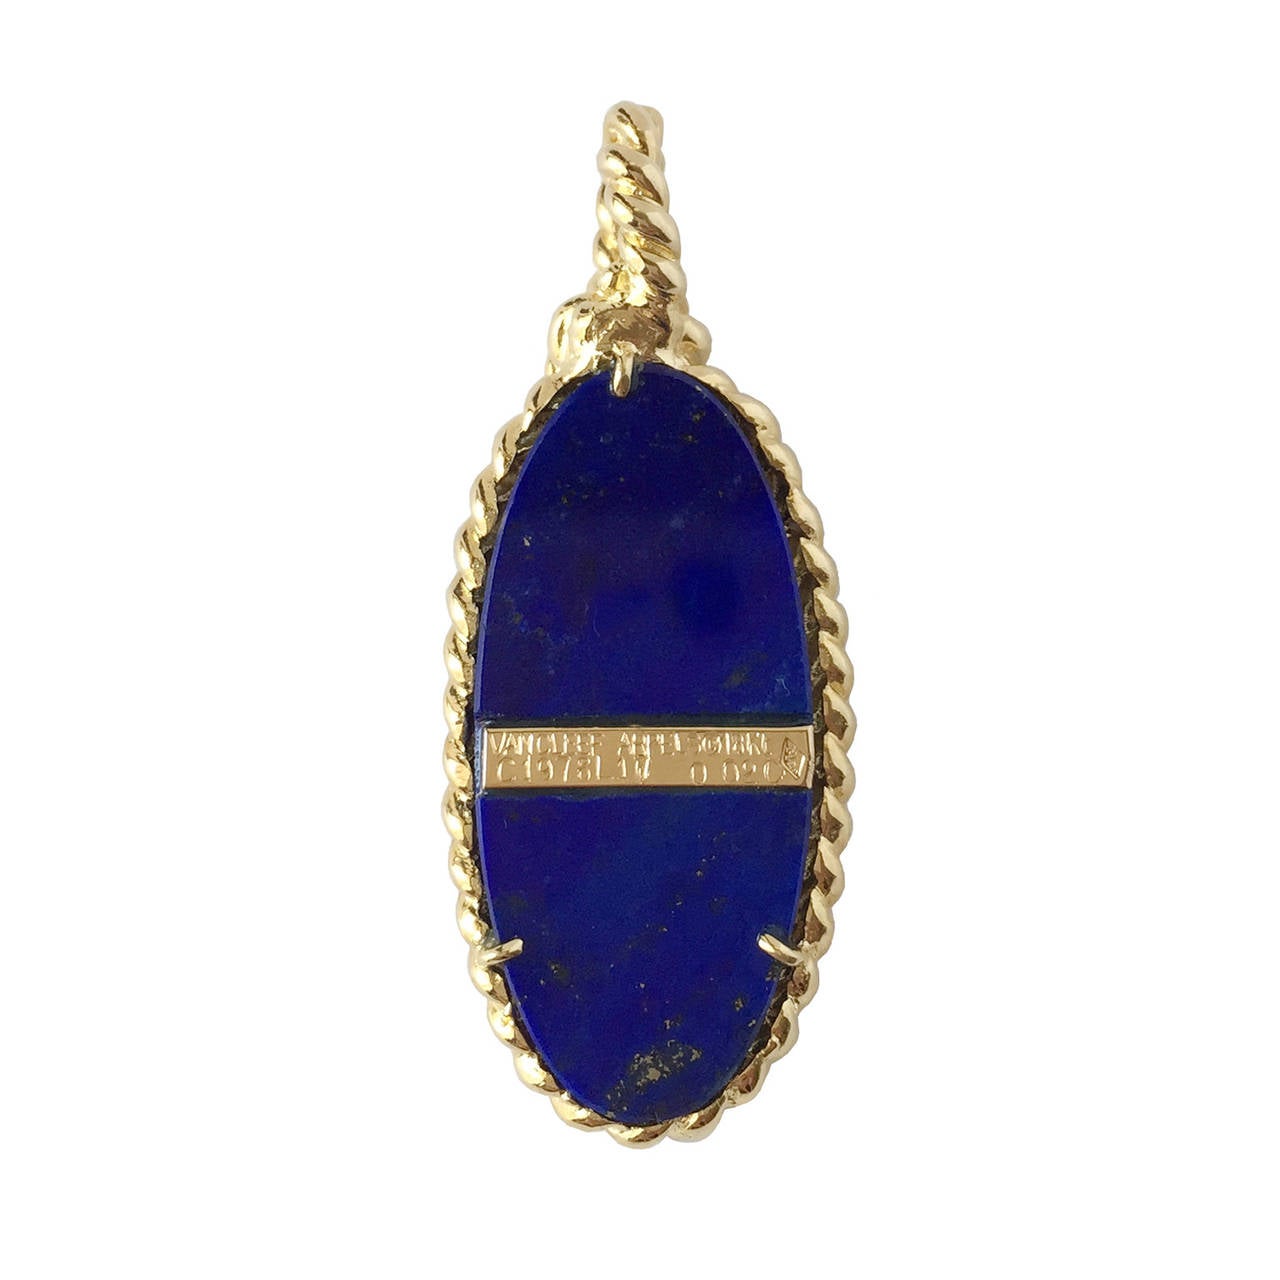 Van Cleef & Arpels 18K gold pendant representing an anchor on a lapis lazuli plaque, circa 1970s. The gold anchor is accented with a 0.02ct diamond.
 A nautical style loved around the world, the anchor represents hope and maritime